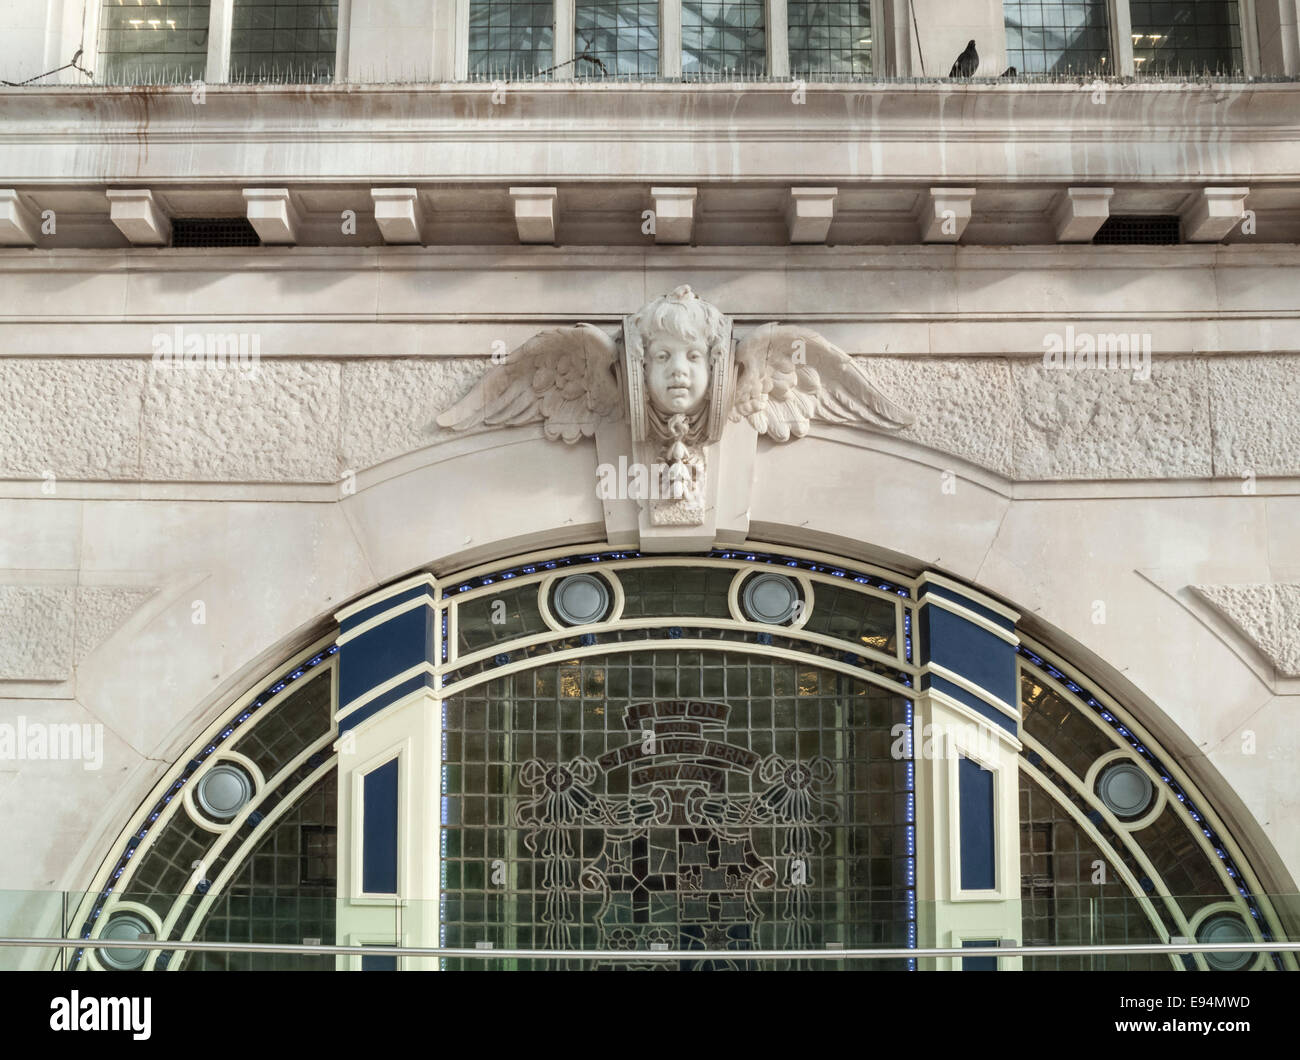 Decorative stone carving of a winged cherub above a now-closed doorway entrance in London Waterloo station, UK's busiest railway station Stock Photo